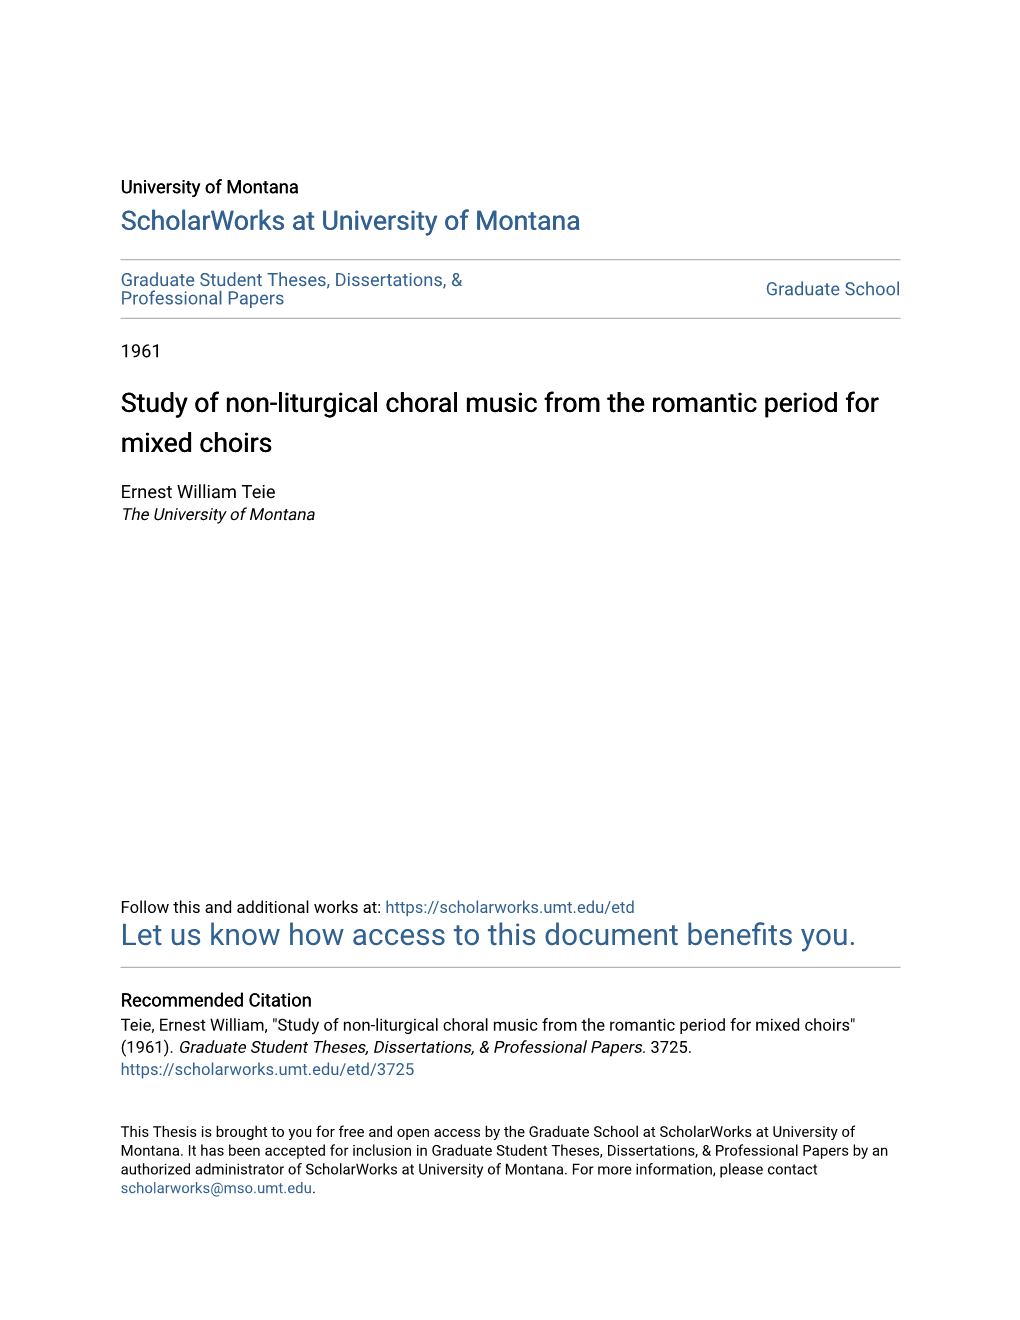 Study of Non-Liturgical Choral Music from the Romantic Period for Mixed Choirs